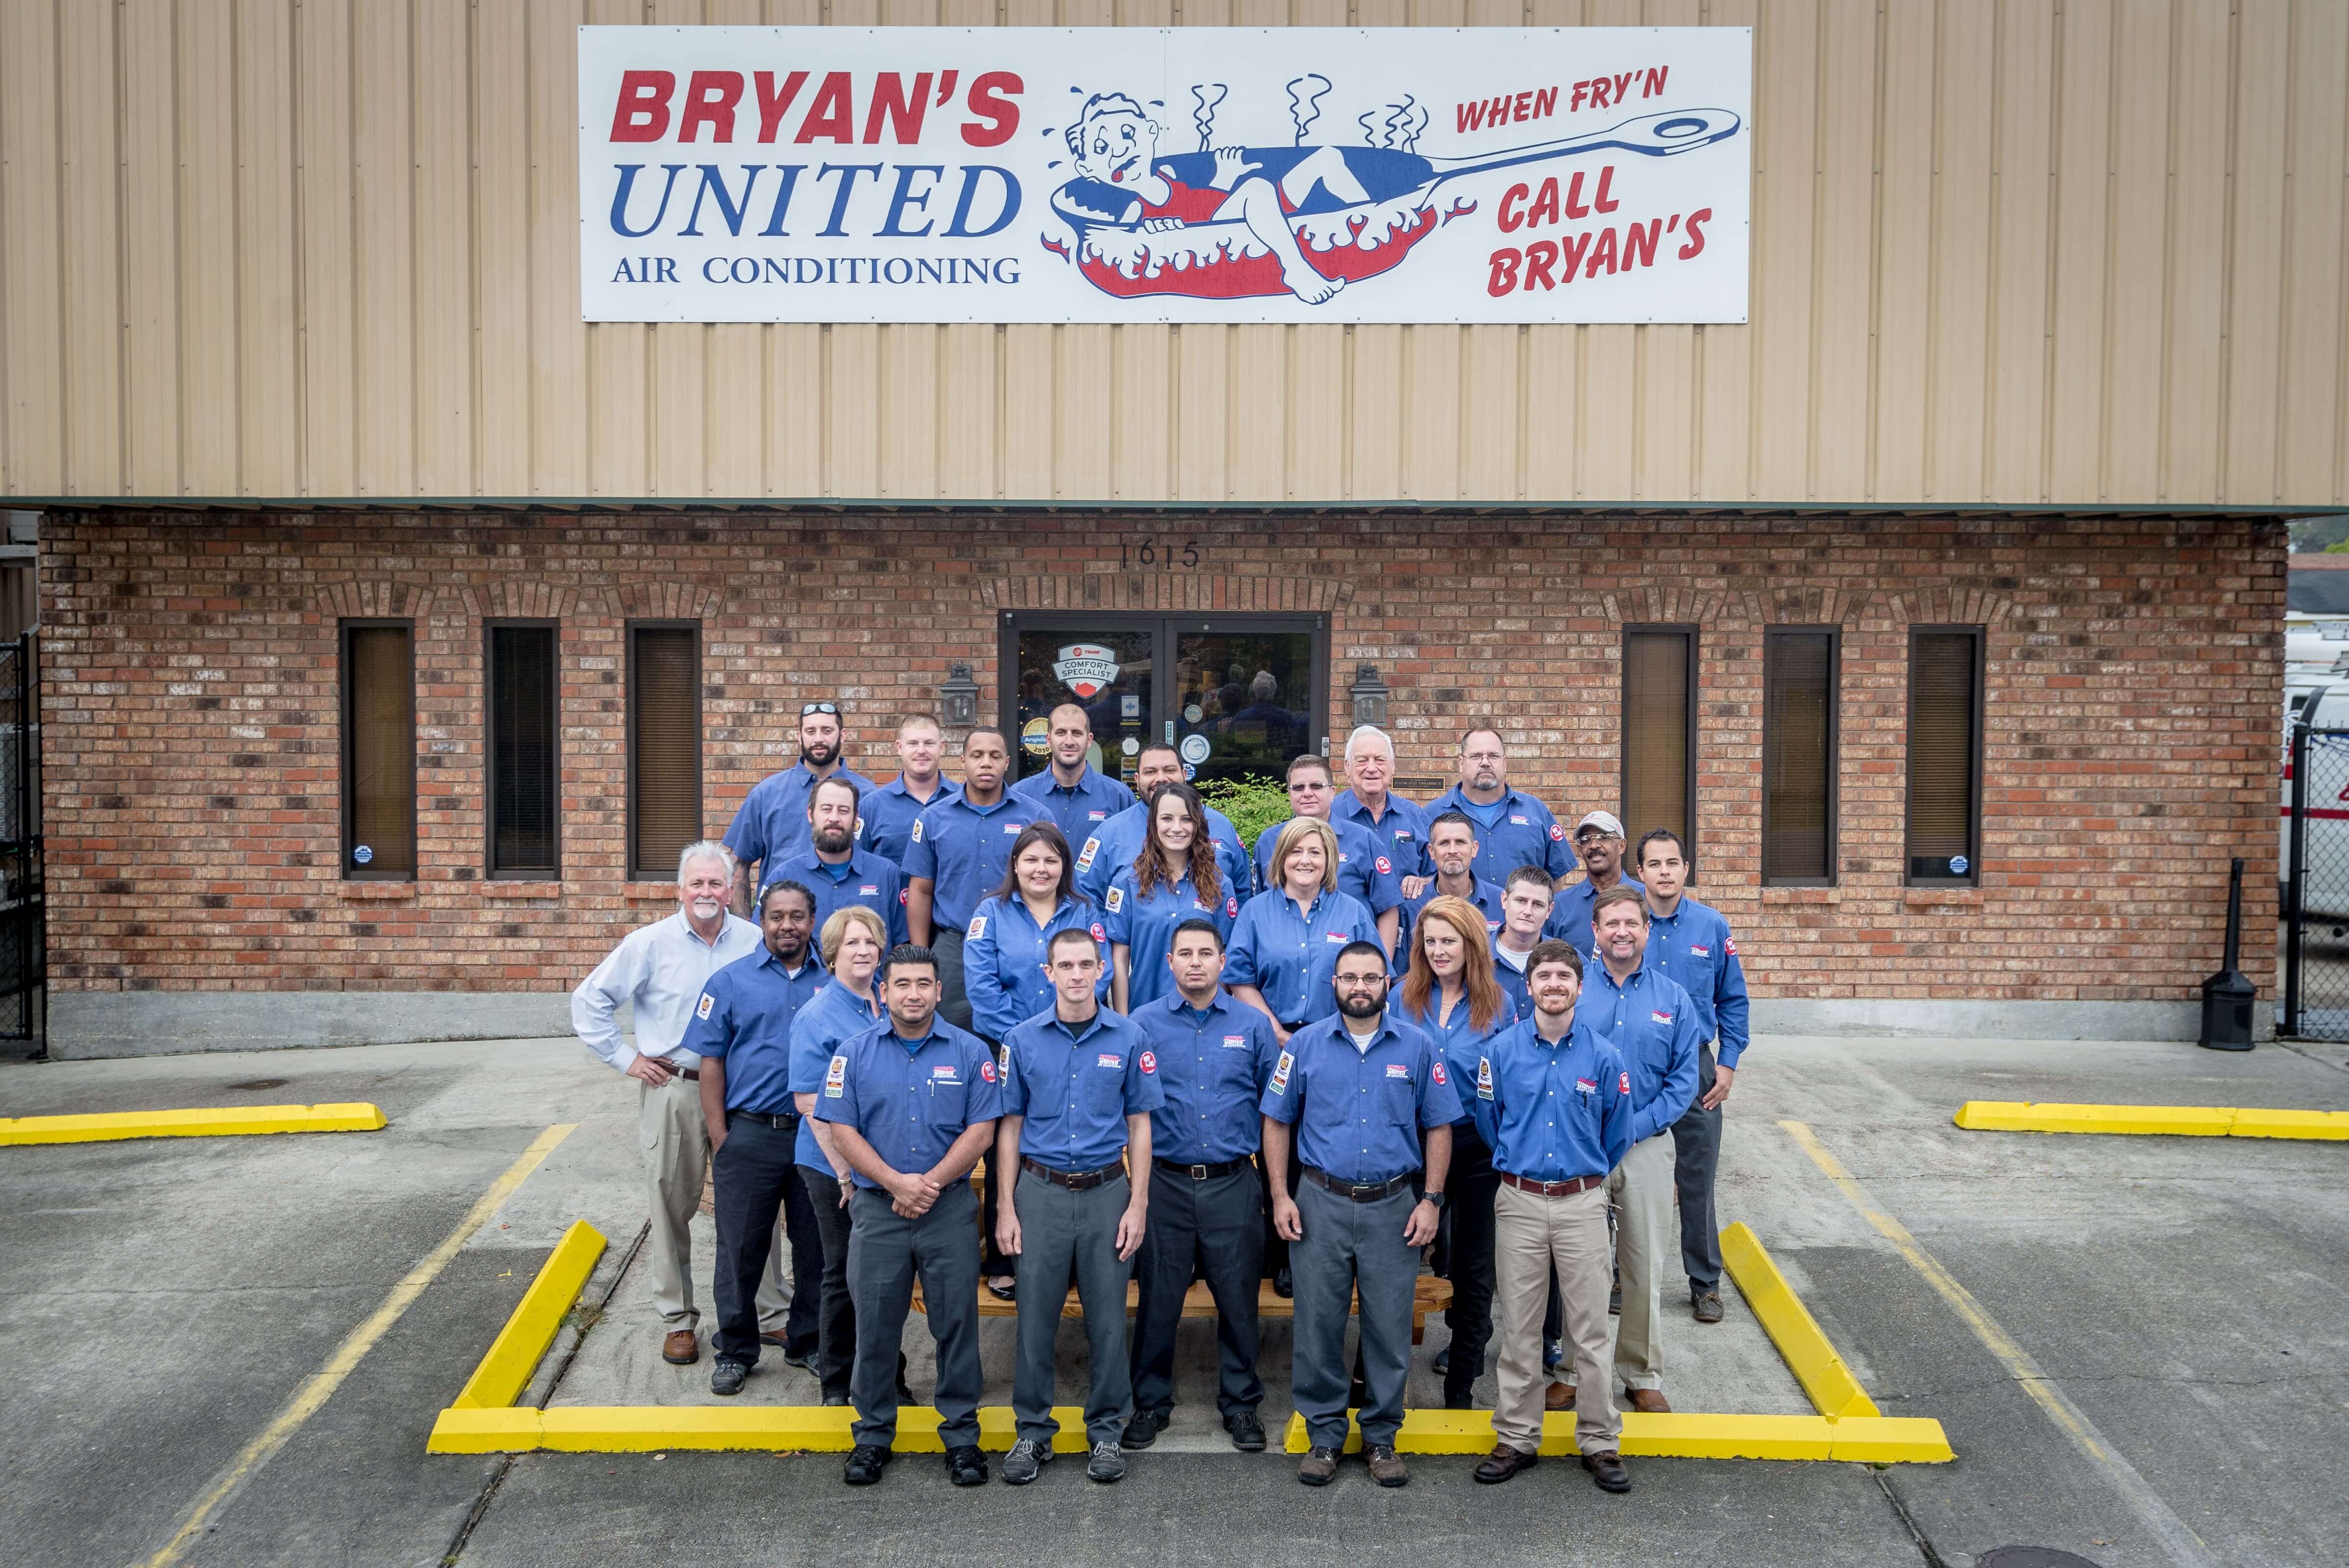 Bryans United Air Conditioning Photo